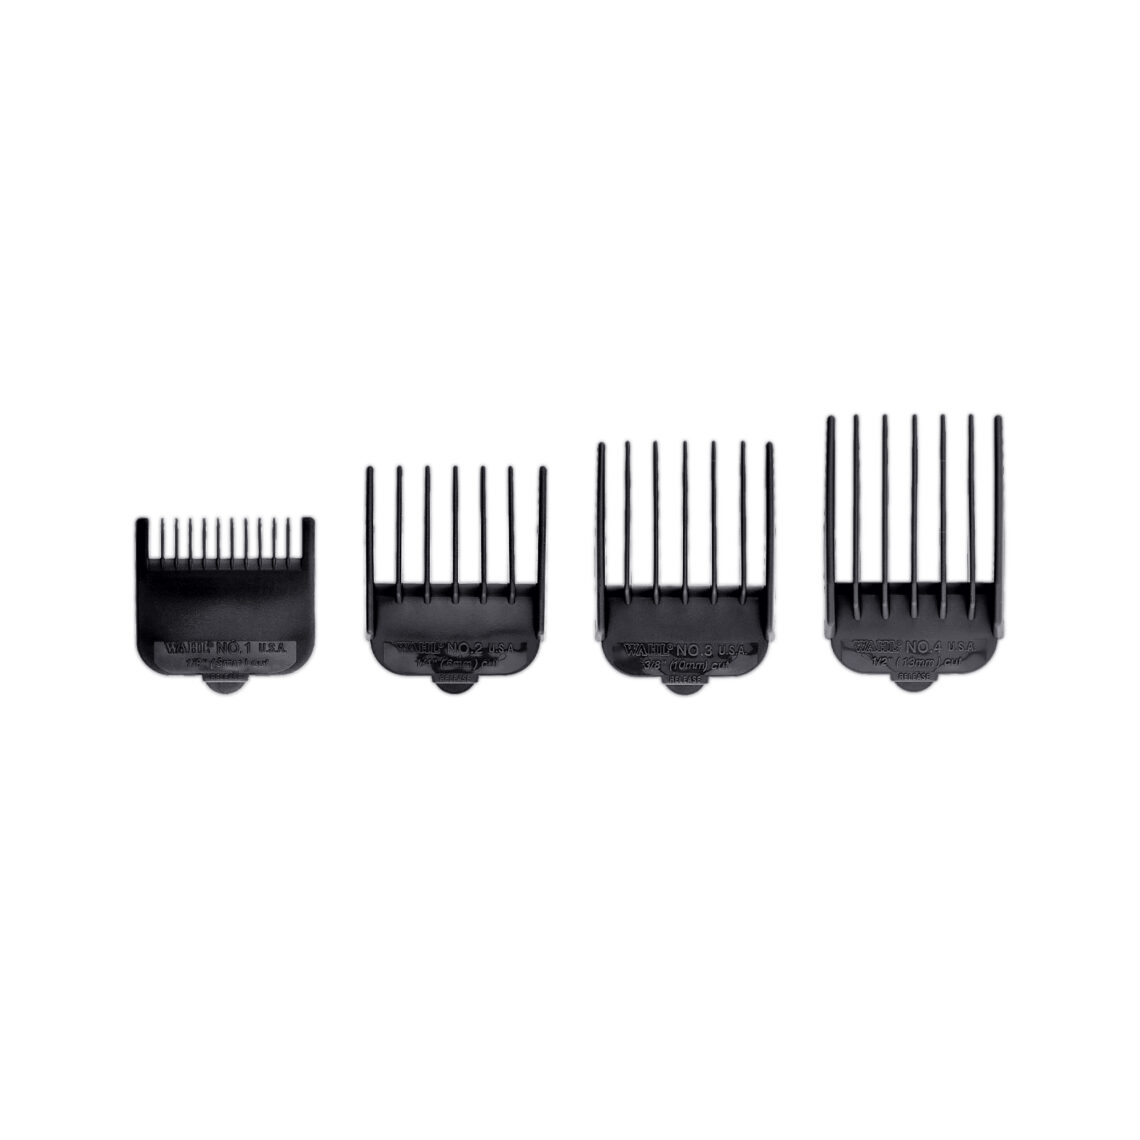 comb attachment for hair trimmer